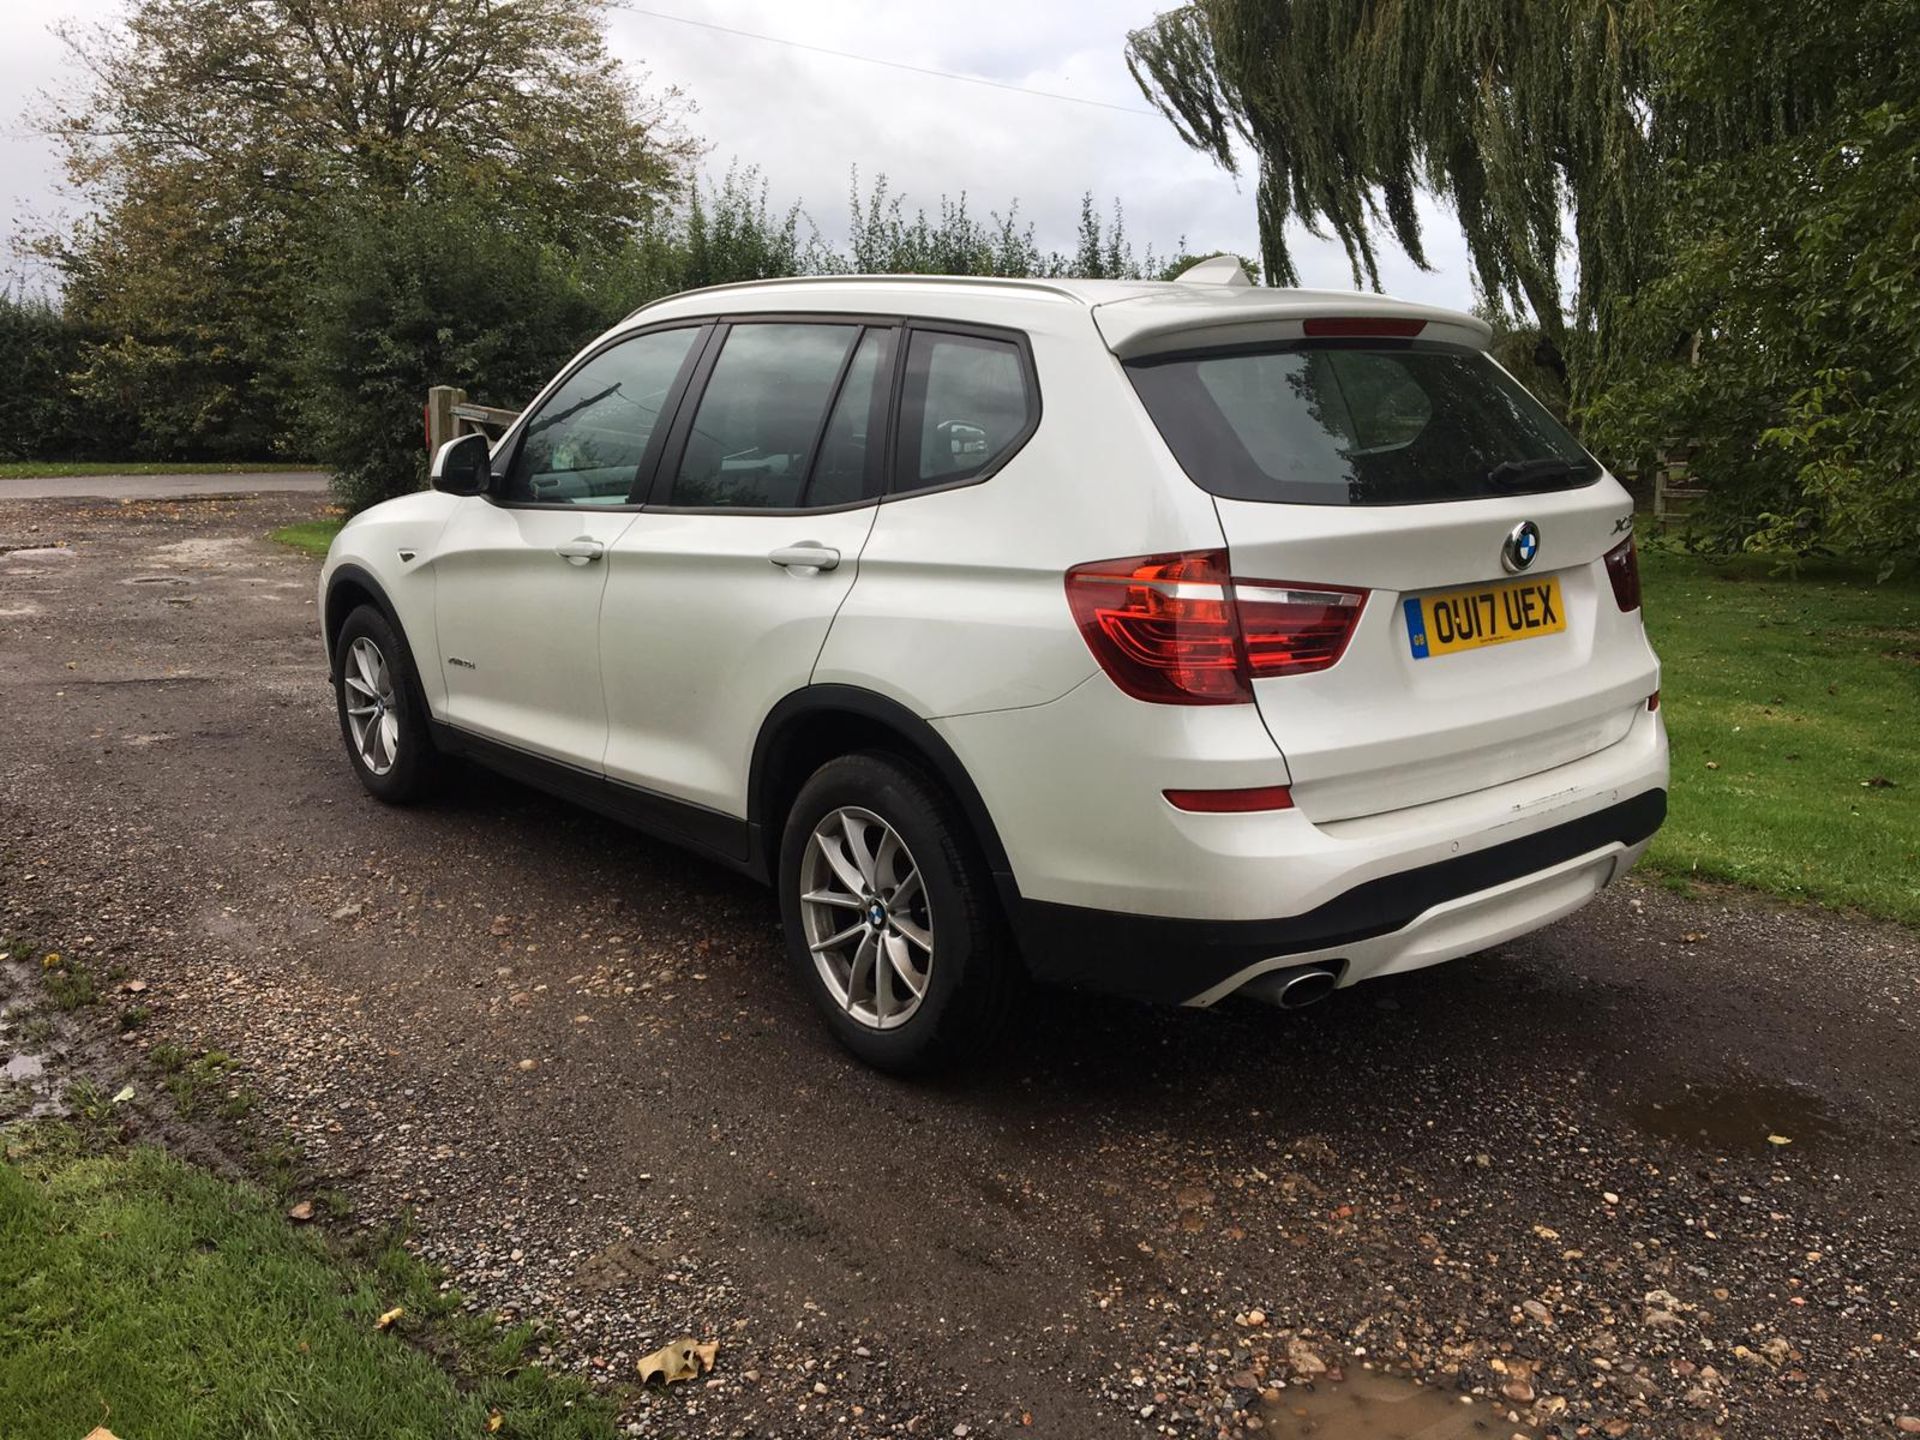 2017/17 REG BMW X3 XDRIVE 20D SE AUTO 2.0 DIESEL WHITE ESTATE, SHOWING 0 FORMER KEEPERS *NO VAT* - Image 5 of 15